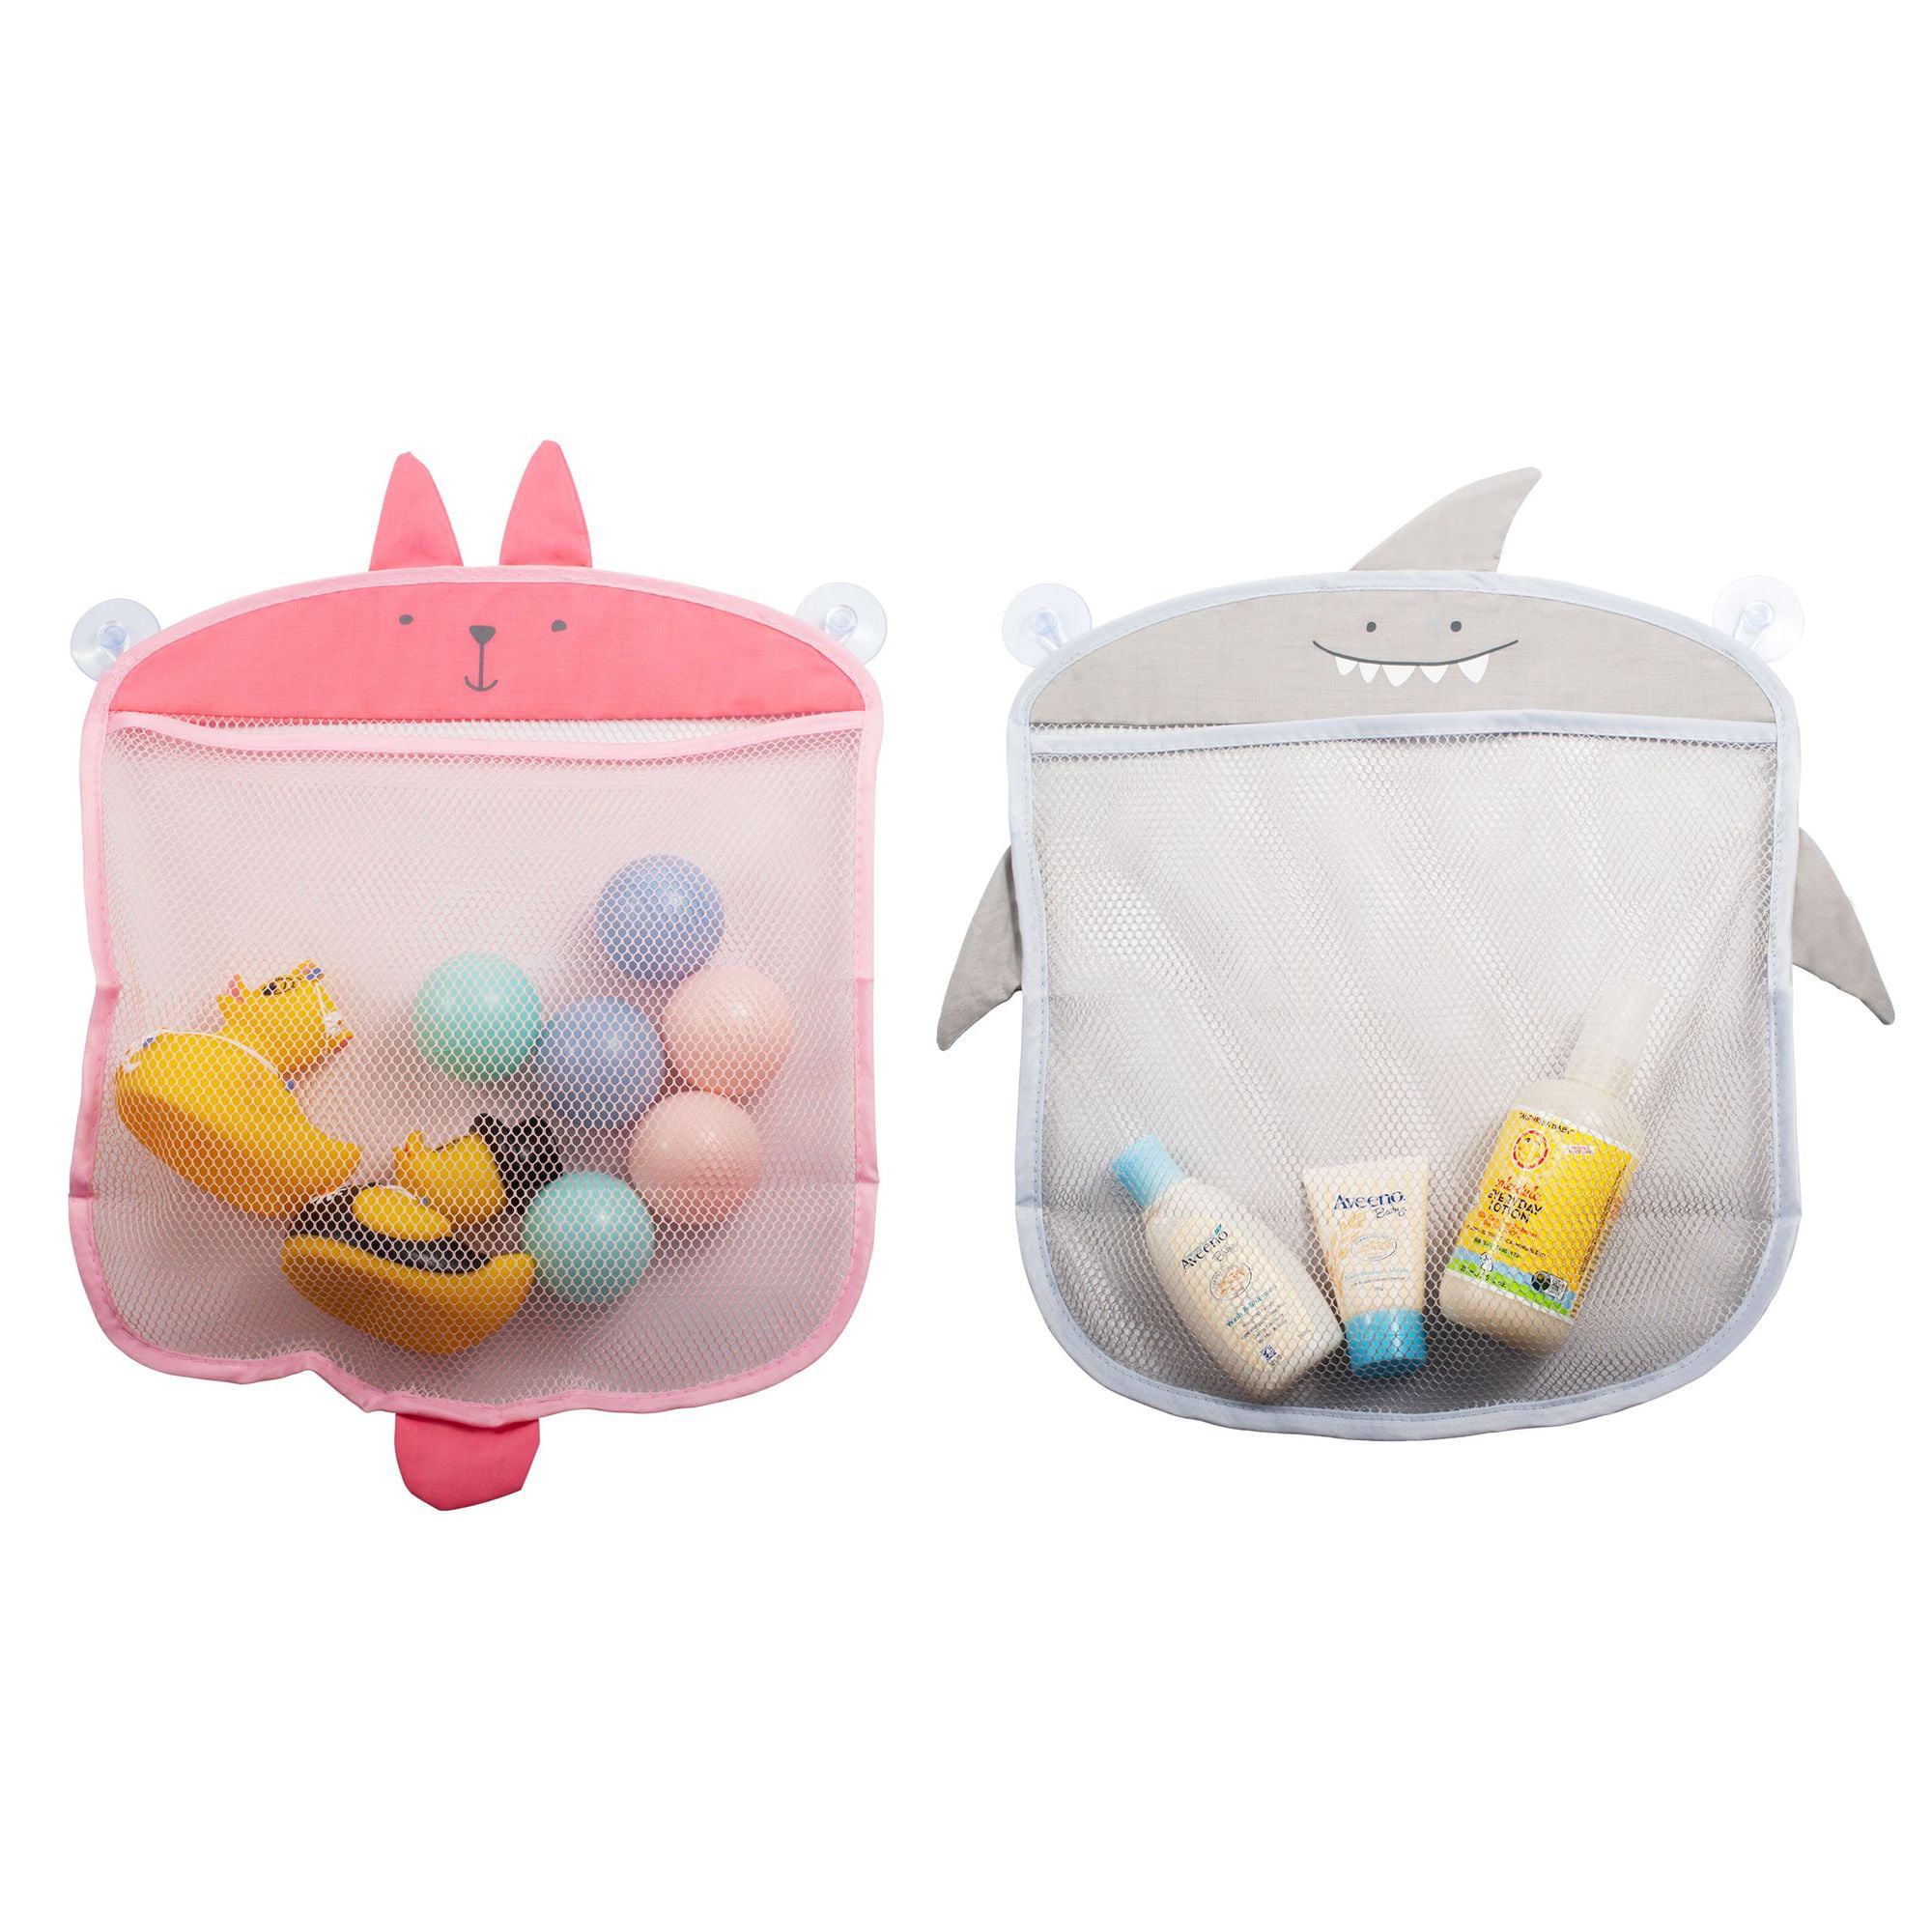 baby toy storage bags